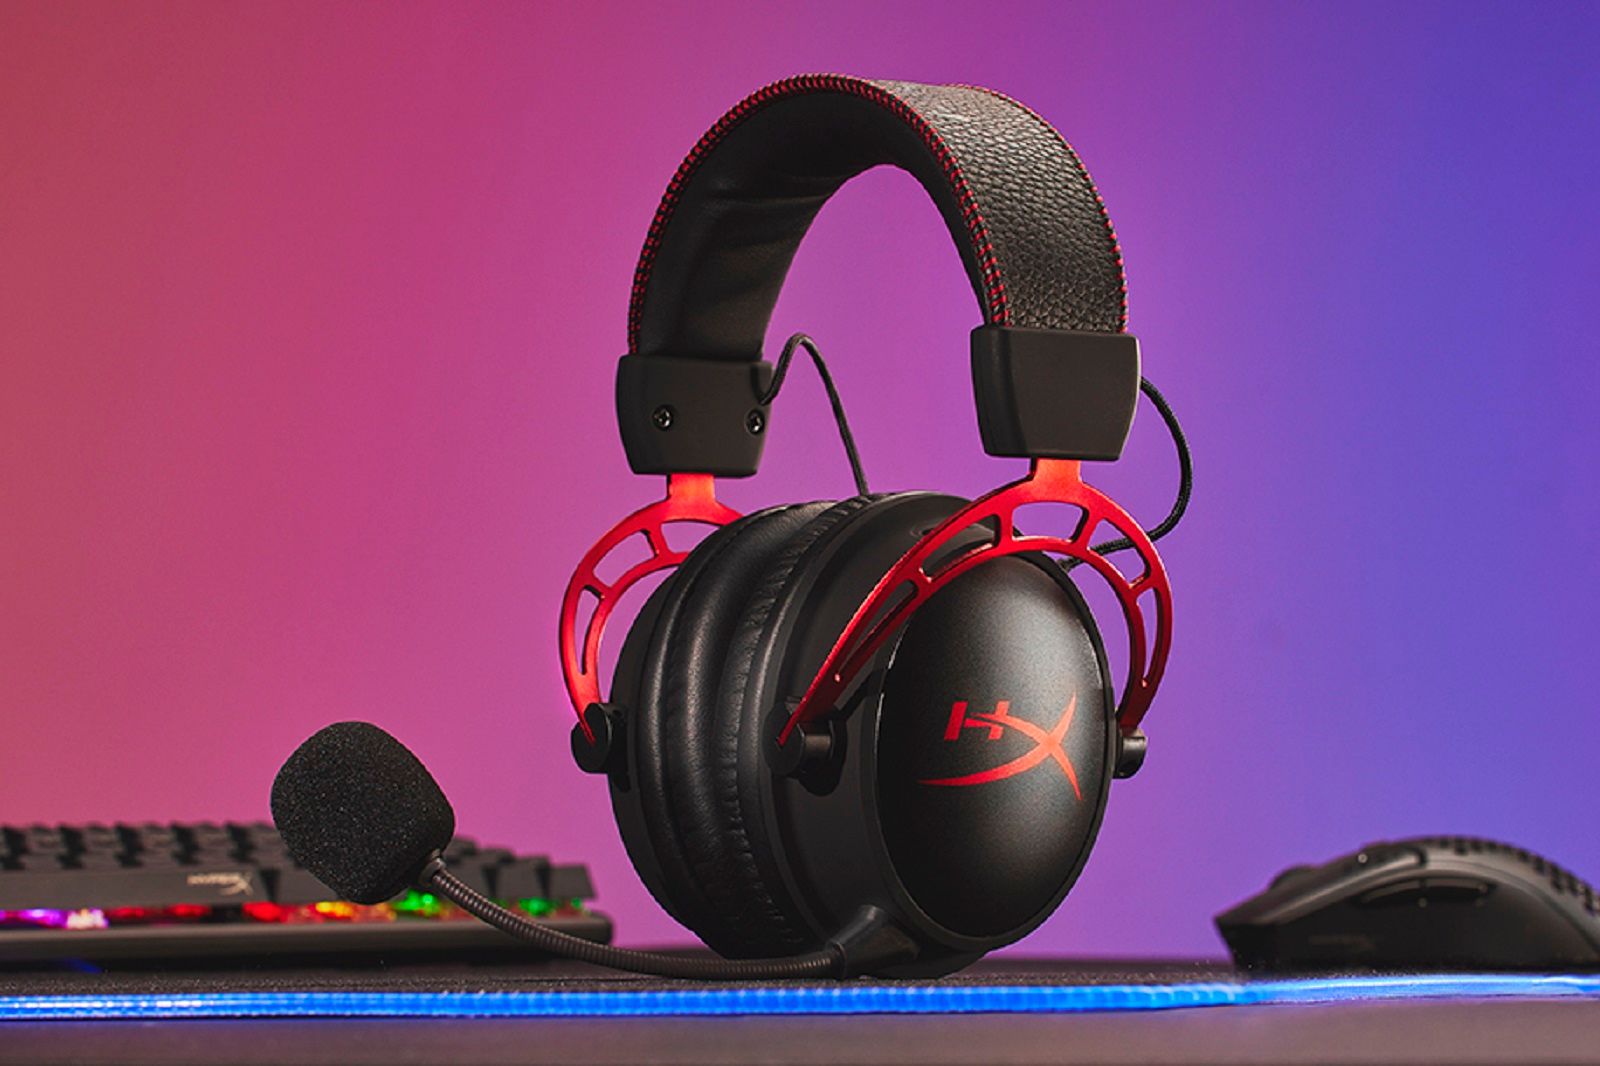 HyperX has revealed a whole bunch of awesome new peripherals photo 3